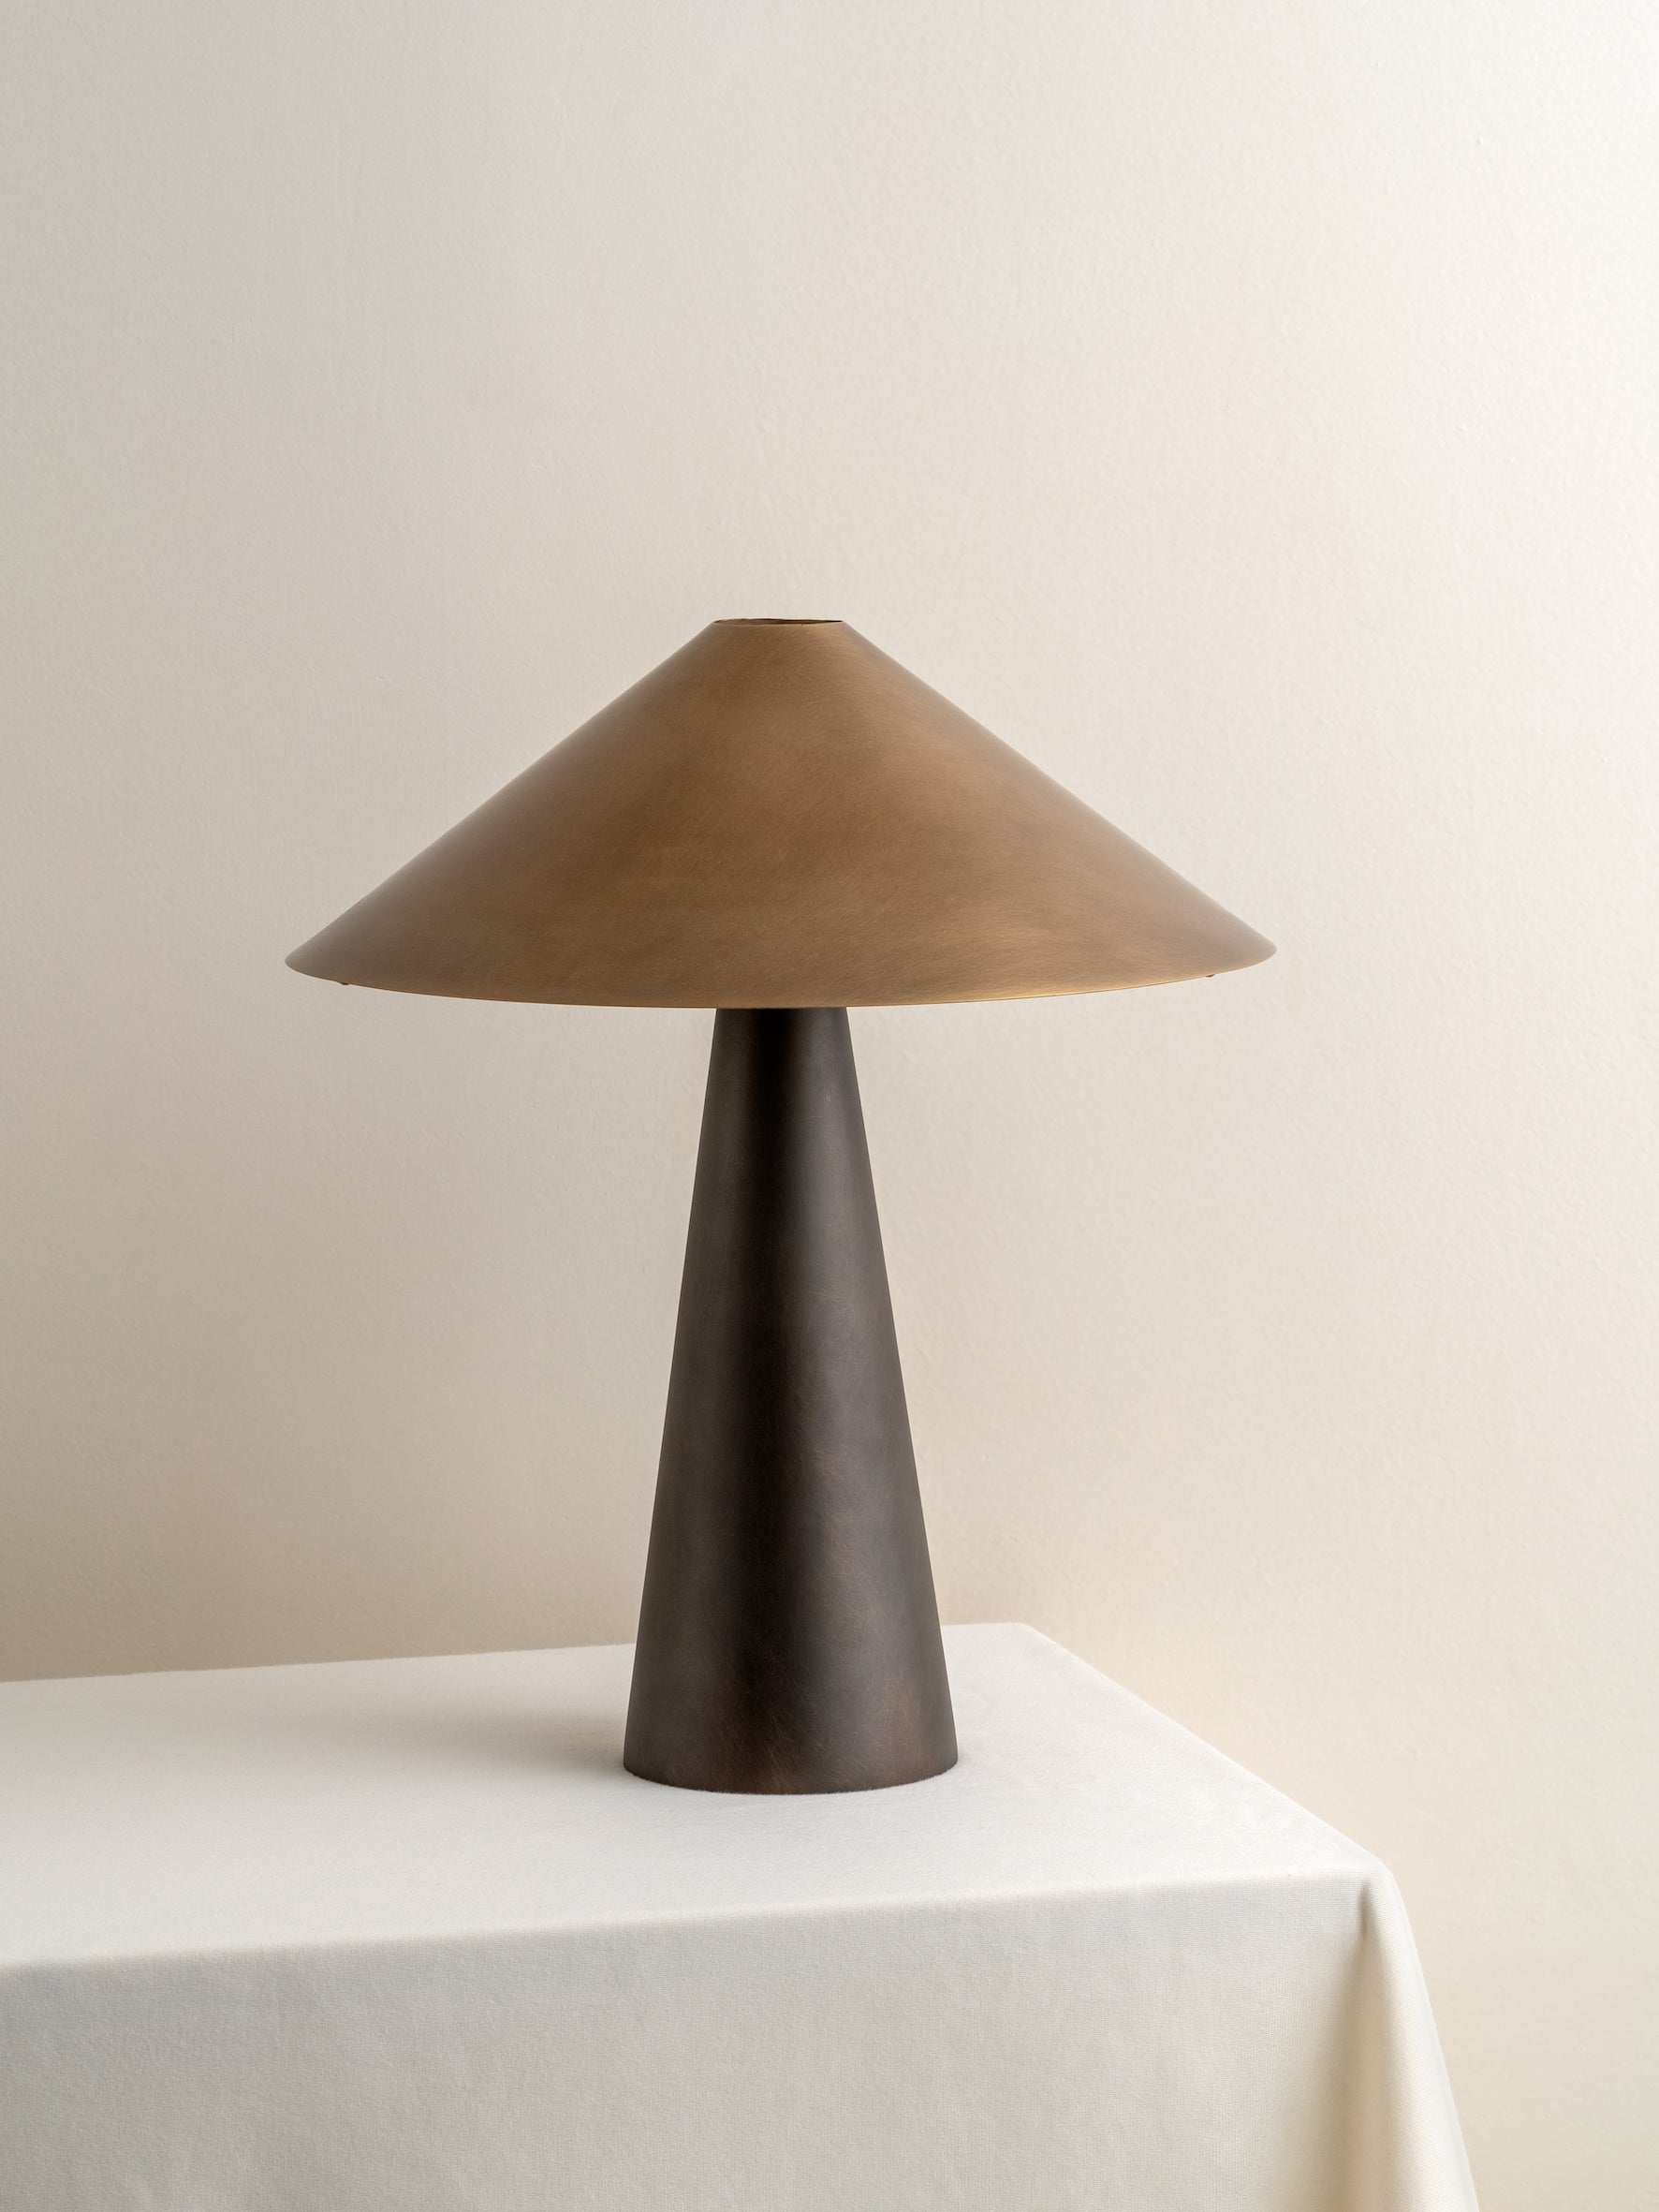 Orta - aged brass and bronze cone table lamp | Table Lamp | Lights & Lamps | UK